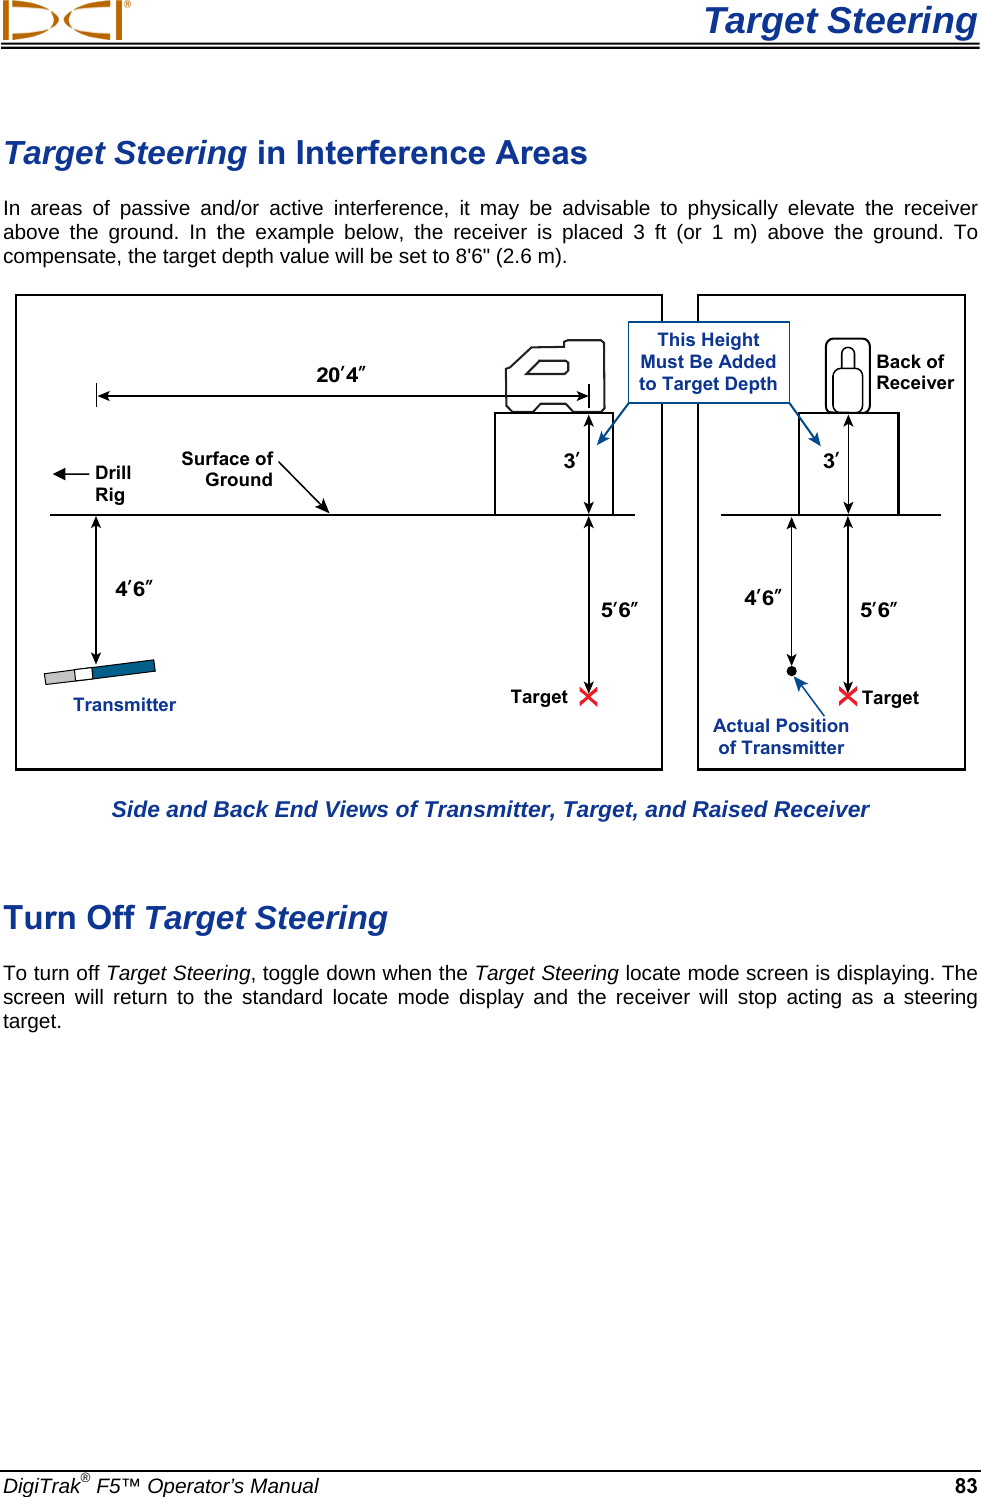  Target Steering DigiTrak® F5™ Operator’s Manual 83 Target Steering in Interference Areas In areas of passive and/or active interference, it may be advisable to physically elevate the receiver above the ground. In the example below, the receiver is placed 3 ft (or 1 m) above the ground. To compensate, the target depth value will be set to 8&apos;6&quot; (2.6 m). 20’4”4’6”5’6”5’6”4’6”3’3’ Side and Back End Views of Transmitter, Target, and Raised Receiver   Turn Off Target Steering To turn off Target Steering, toggle down when the Target Steering locate mode screen is displaying. The screen will return to the standard locate mode display and the receiver will stop acting as a steering target.  Drill Rig Surface of Ground Back of ReceiverTargetTransmitter TargetActual Position of Transmitter This Height Must Be Added to Target Depth 